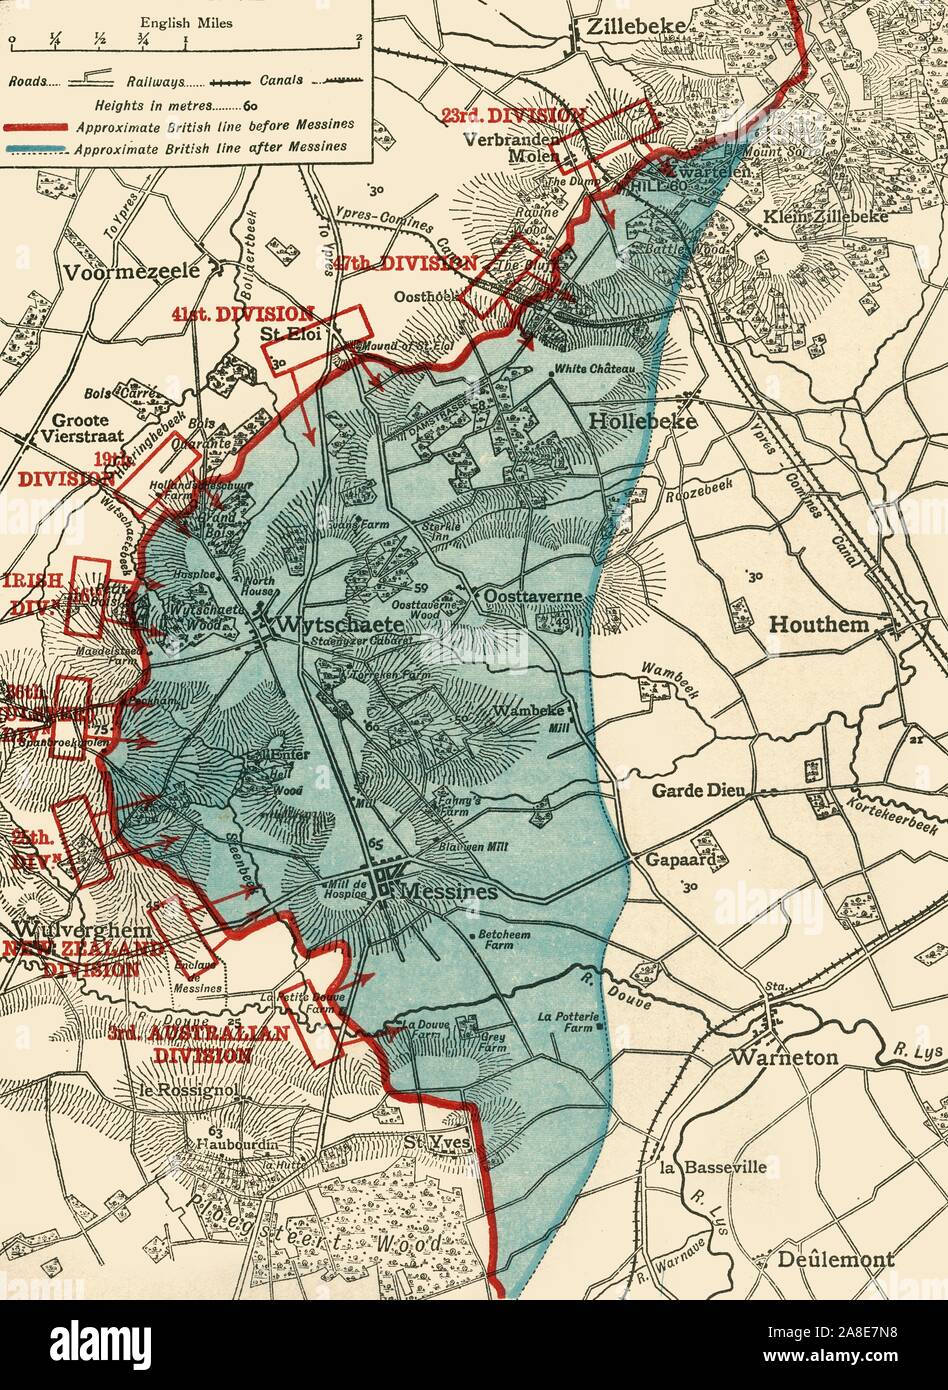 'Map to illustrate the Battle of Messines', First World War, June 1917, (c1920). The blue area shows ground gained from the Germans by the British under General Sir Herbert Plumer, 7-14 June 1917. The battle took place on the Western Front near the village of Messines in West Flanders, Belgium. From &quot;The Great World War: A History&quot;, Volume VII, edited by Frank A Mumby. [The Gresham Publishing Company Ltd, London, c1920] Stock Photo